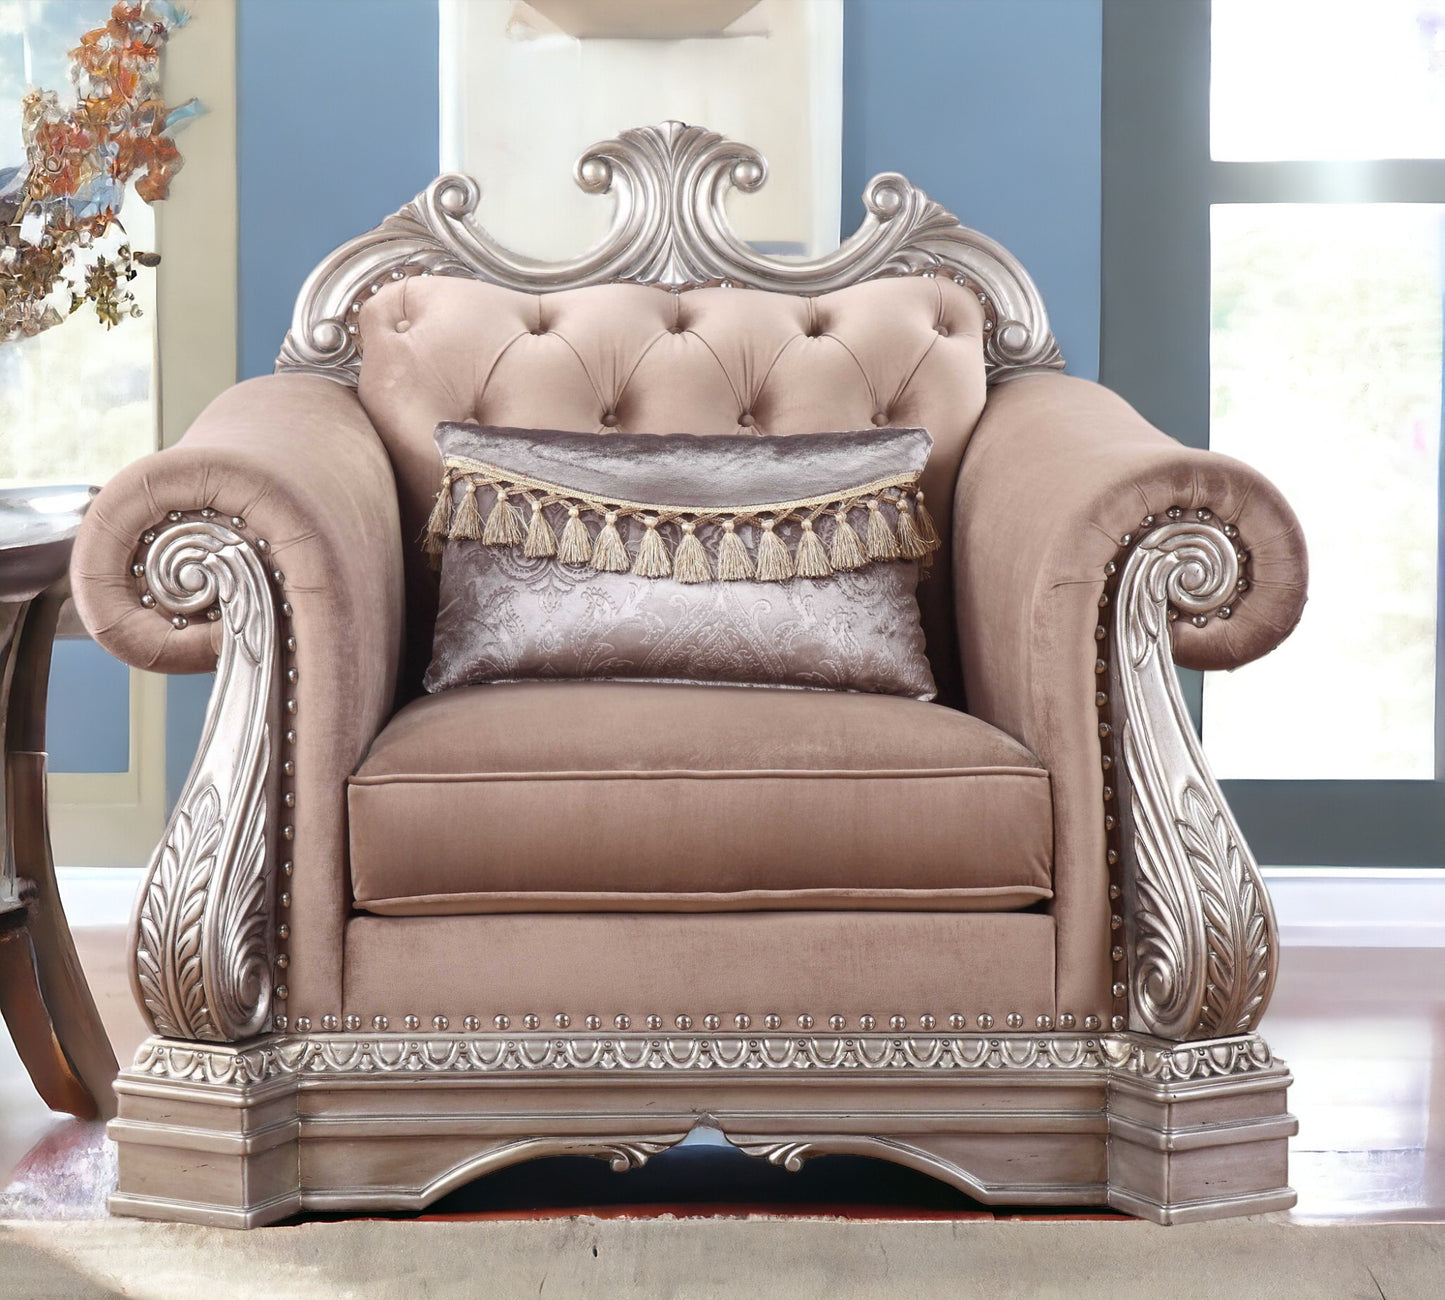 42" Cherry Blossom Pink And Gray Velvet Tufted Chesterfield Chair